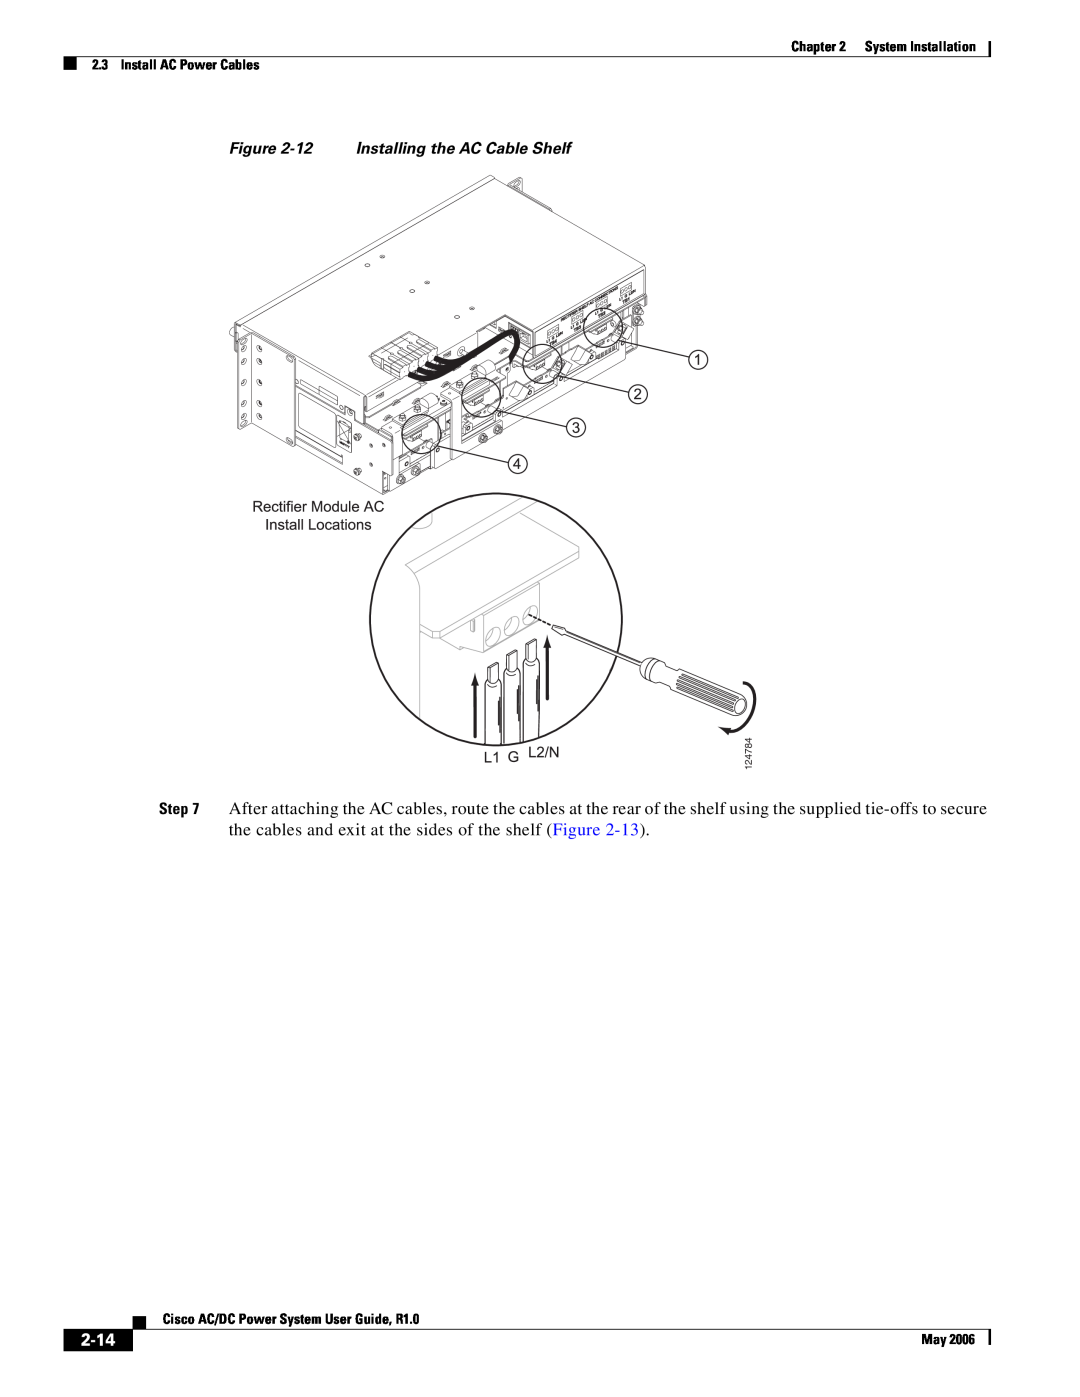 Cisco Systems 124792 manual 2-14, 12 Installing the AC Cable Shelf, System Installation 2.3 Install AC Power Cables, 124784 